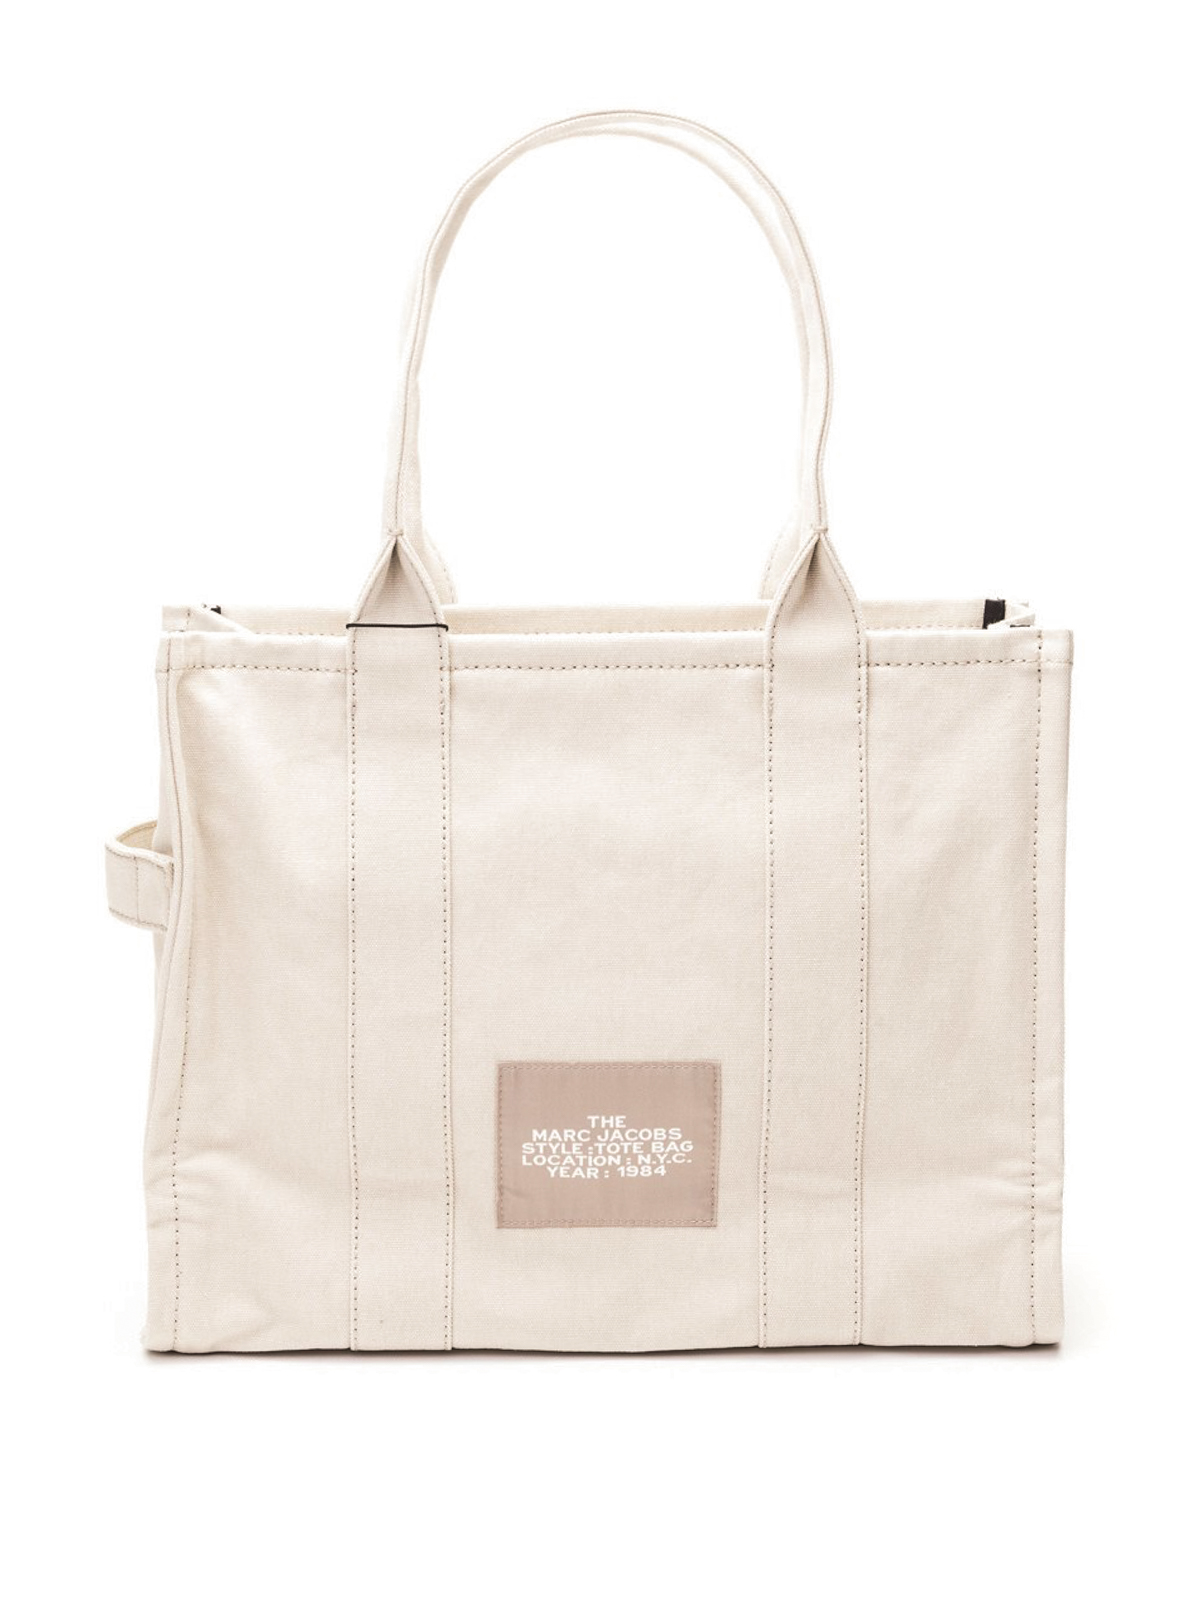 Totes bags Marc Jacobs - The Traveler tote - M0016156260 | iKRIX.com